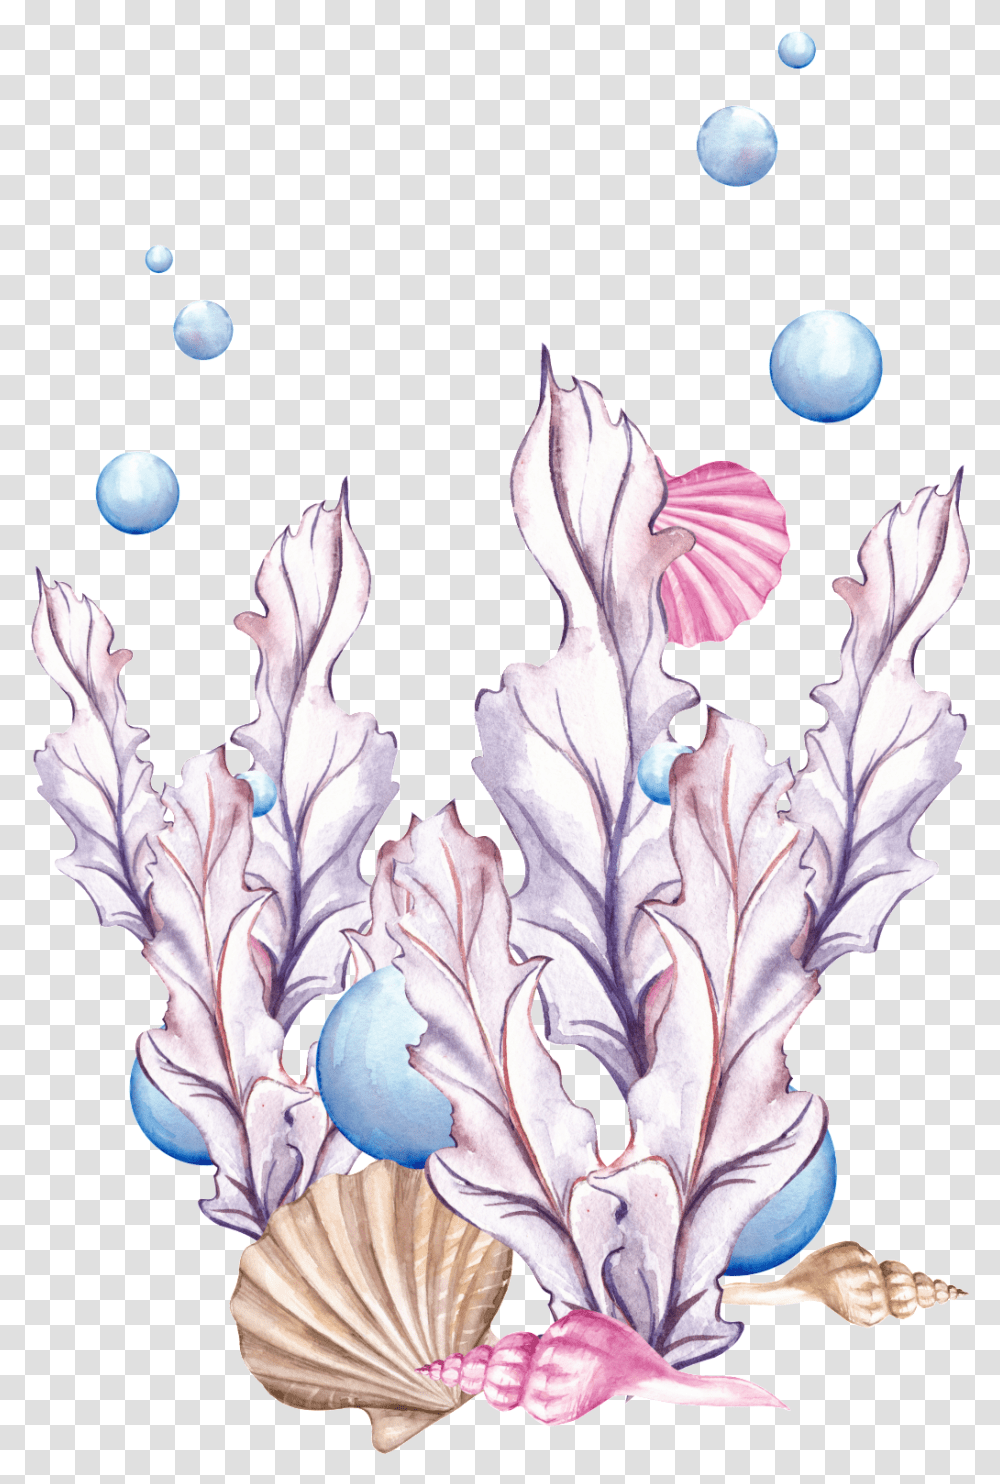 This Backgrounds Is Water And Grass Cartoon Cartoon, Pattern, Graphics, Floral Design, Flower Transparent Png